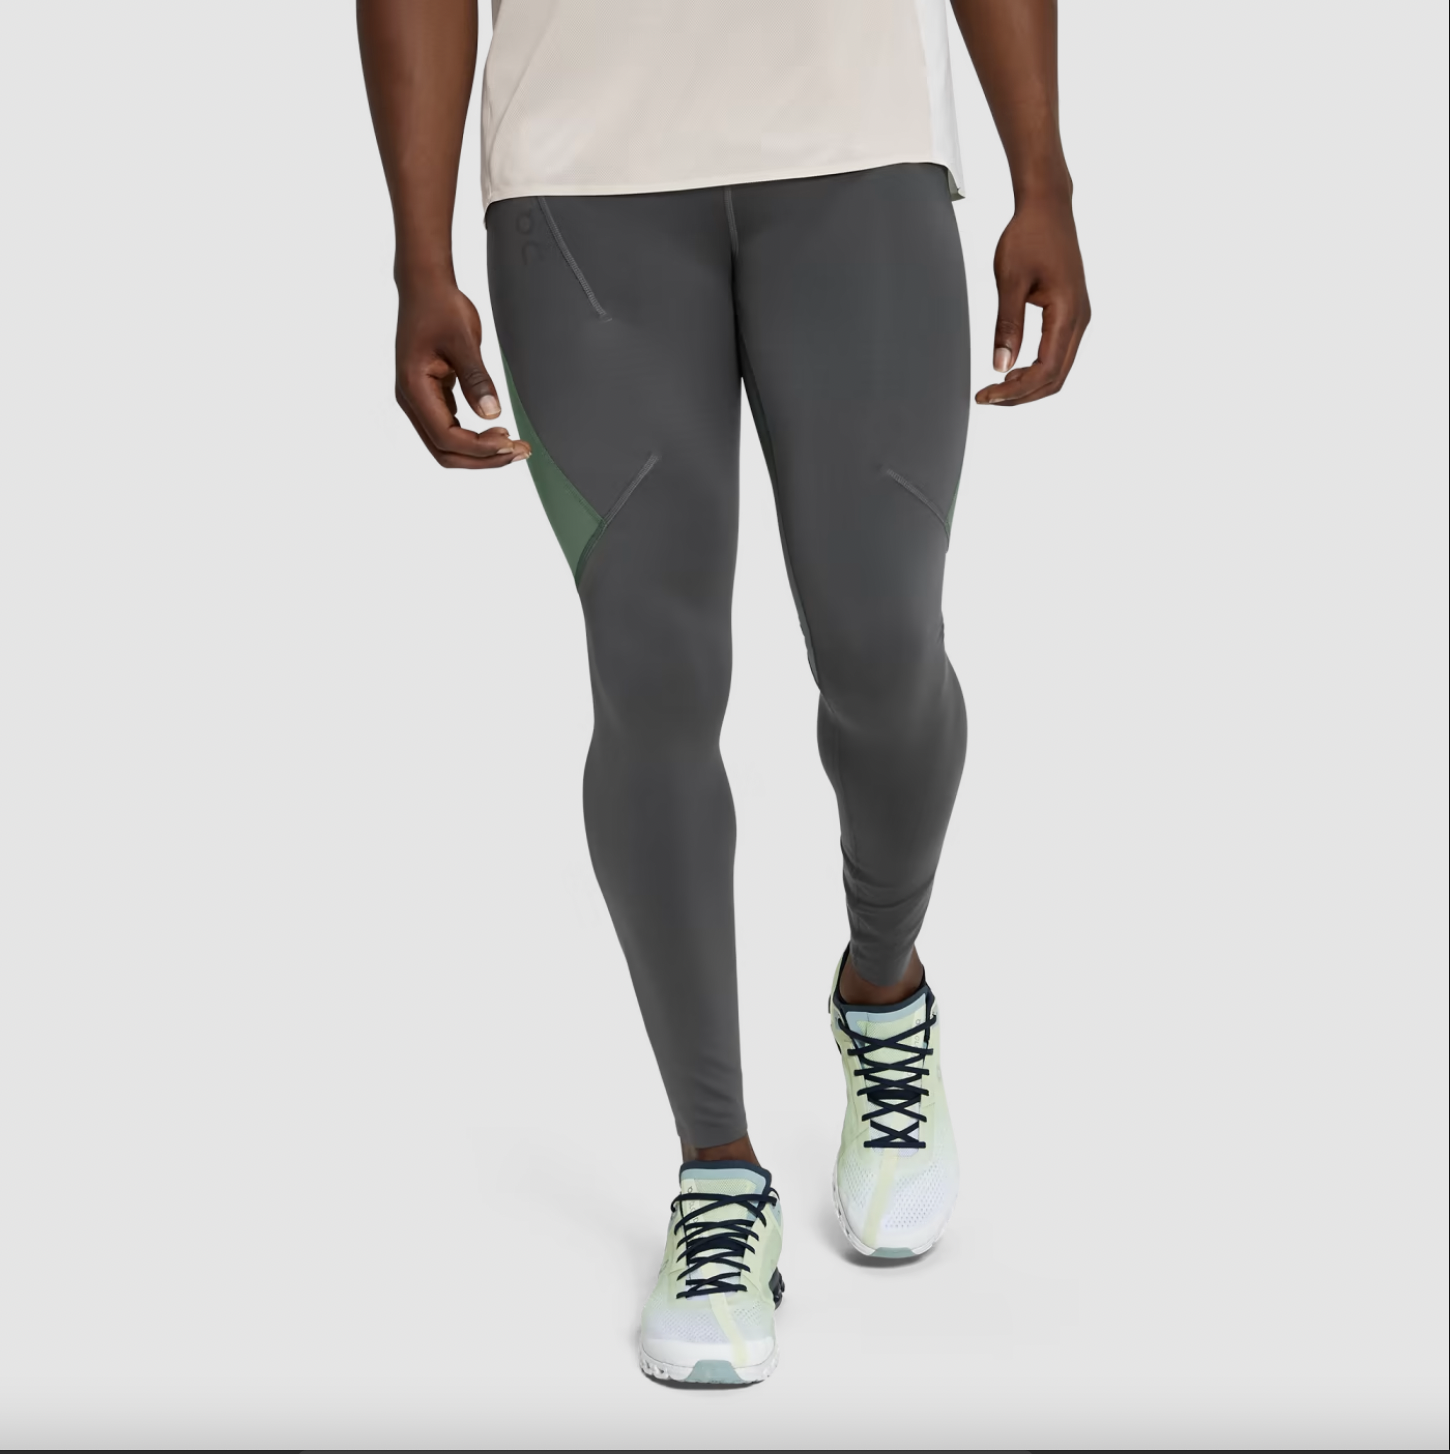 Tracksmith Running Tights Review 2018  The Strategist